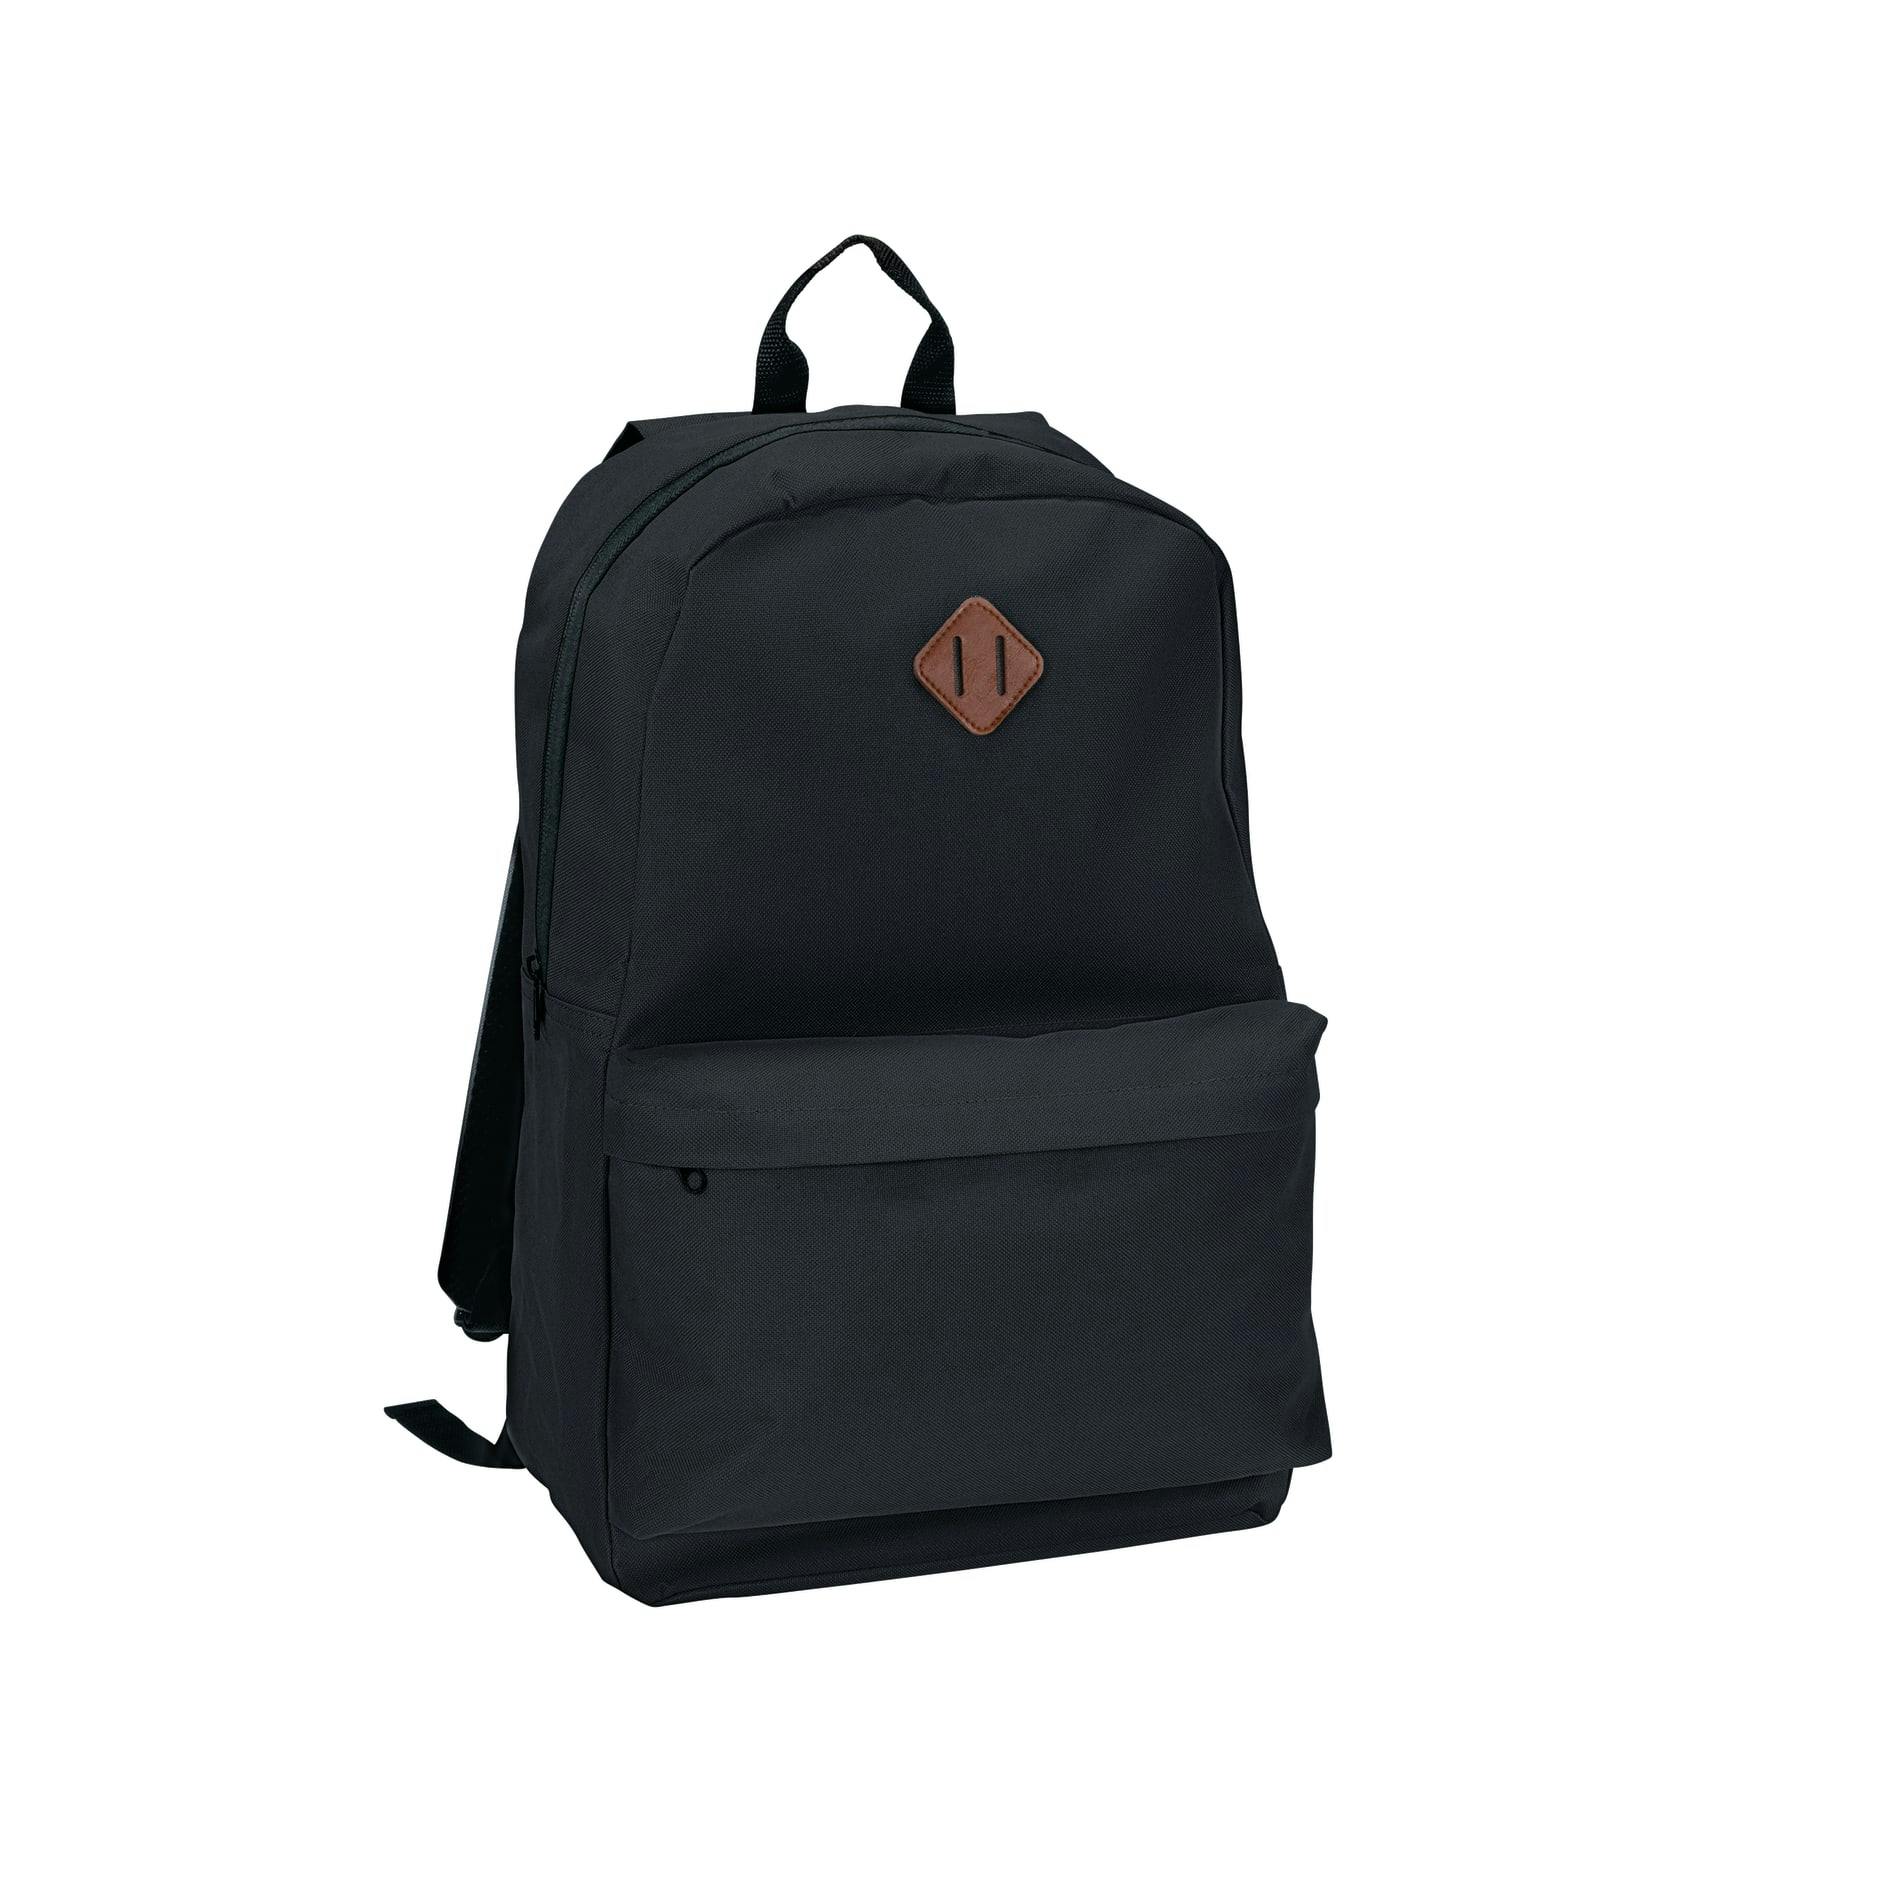 Stratta 15" Computer Backpack - additional Image 1